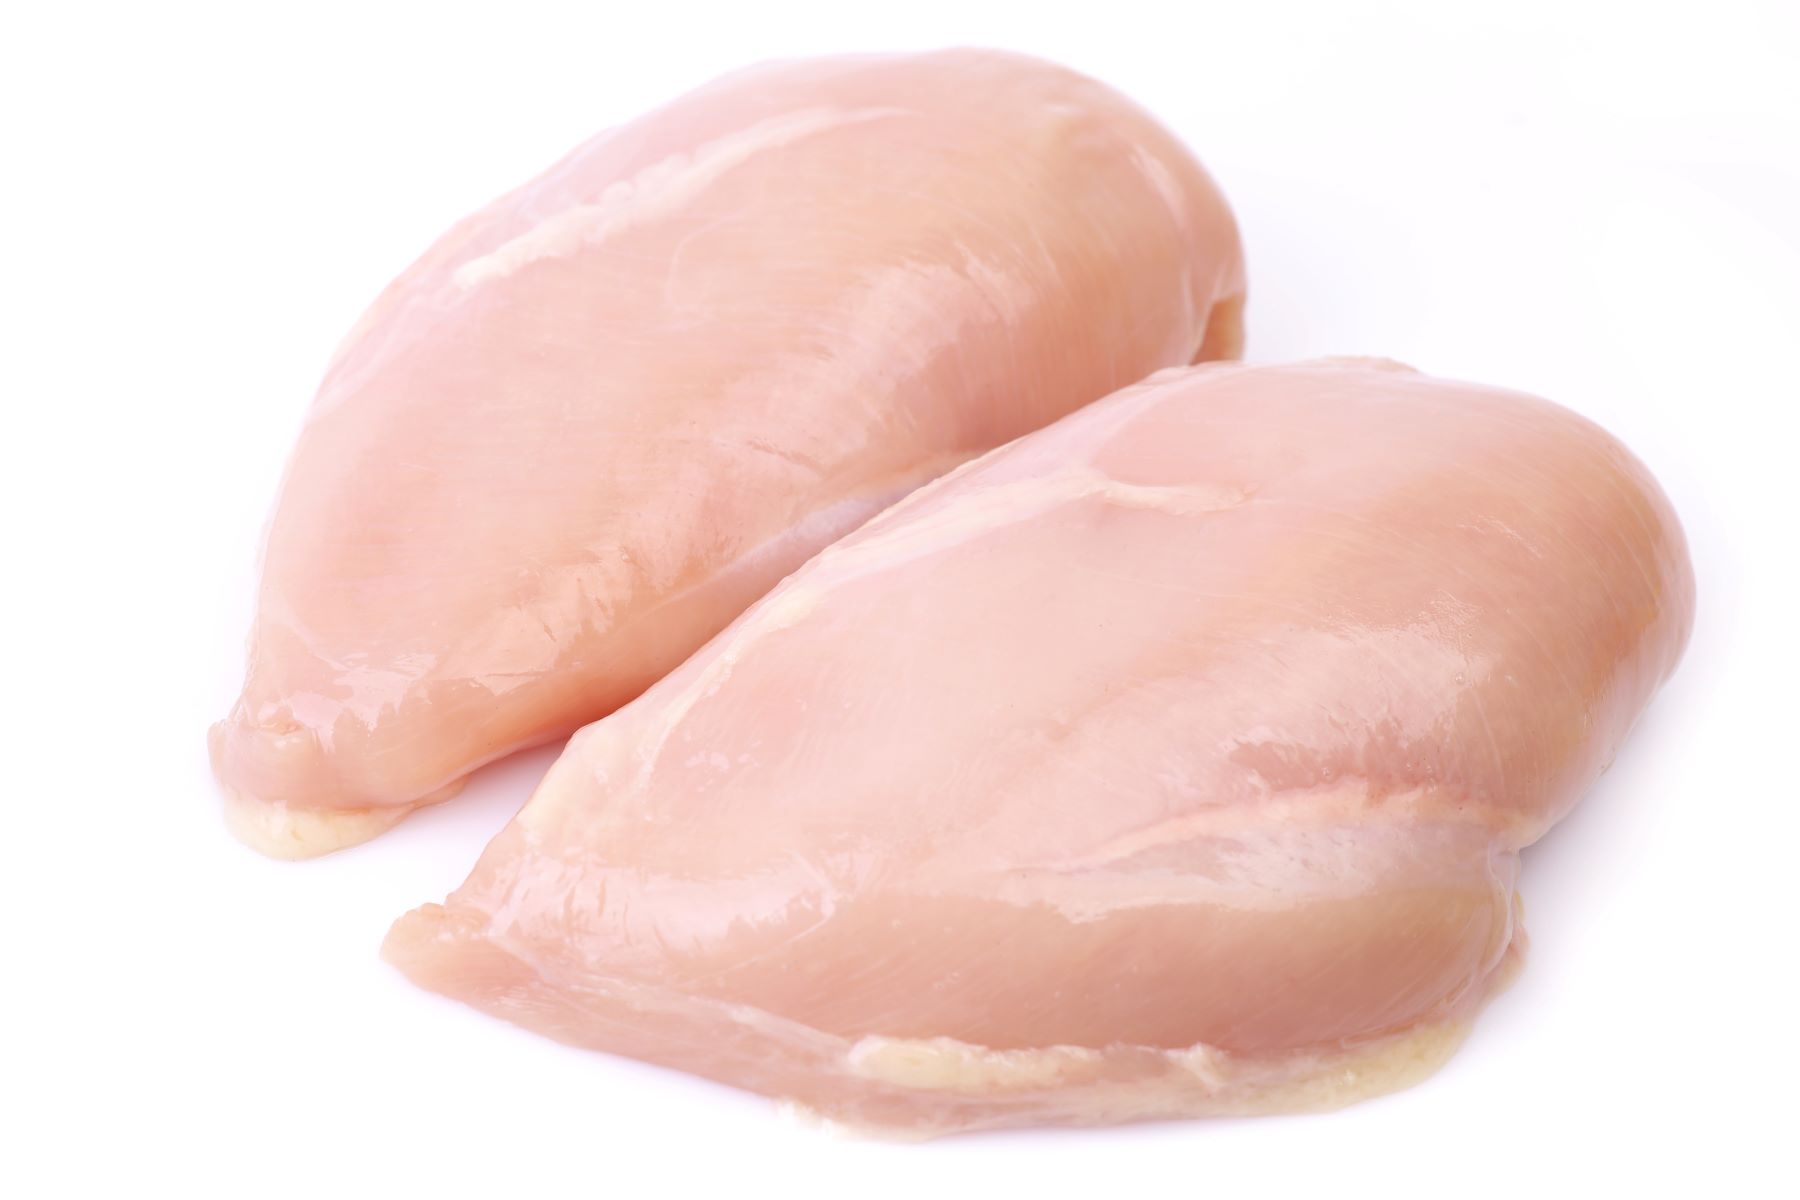 The Surprising Average Weight Of Chicken Breasts Revealed!